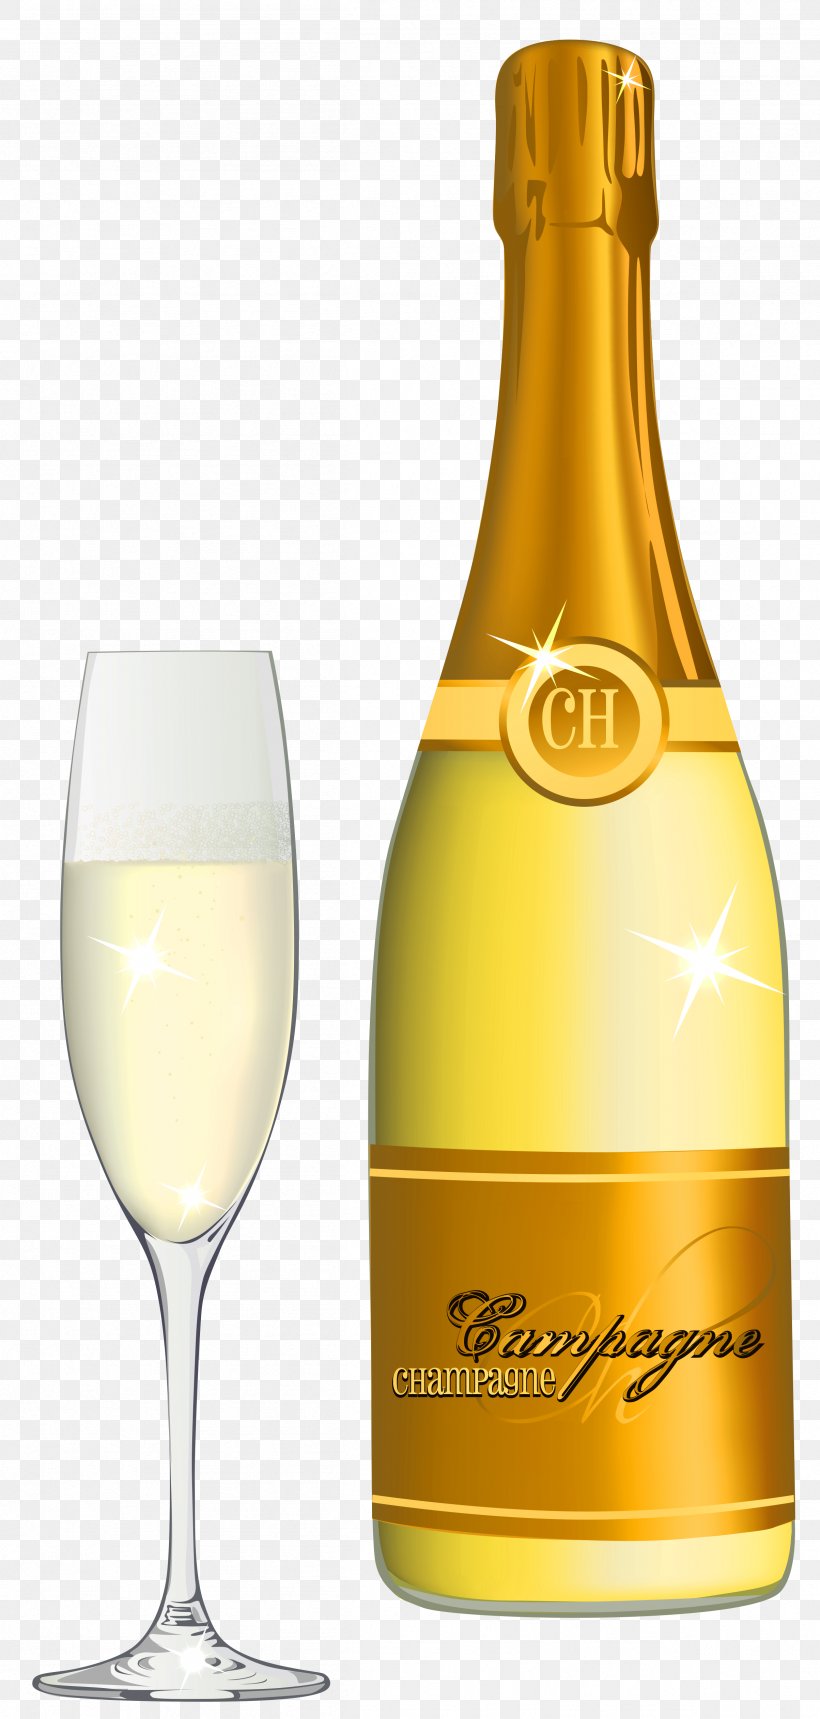 Champagne Cocktail Champagne Cocktail Beer Clip Art, PNG, 2407x5047px, Champagne, Alcoholic Beverage, Beer, Bottle, Champagne Cocktail Download Free